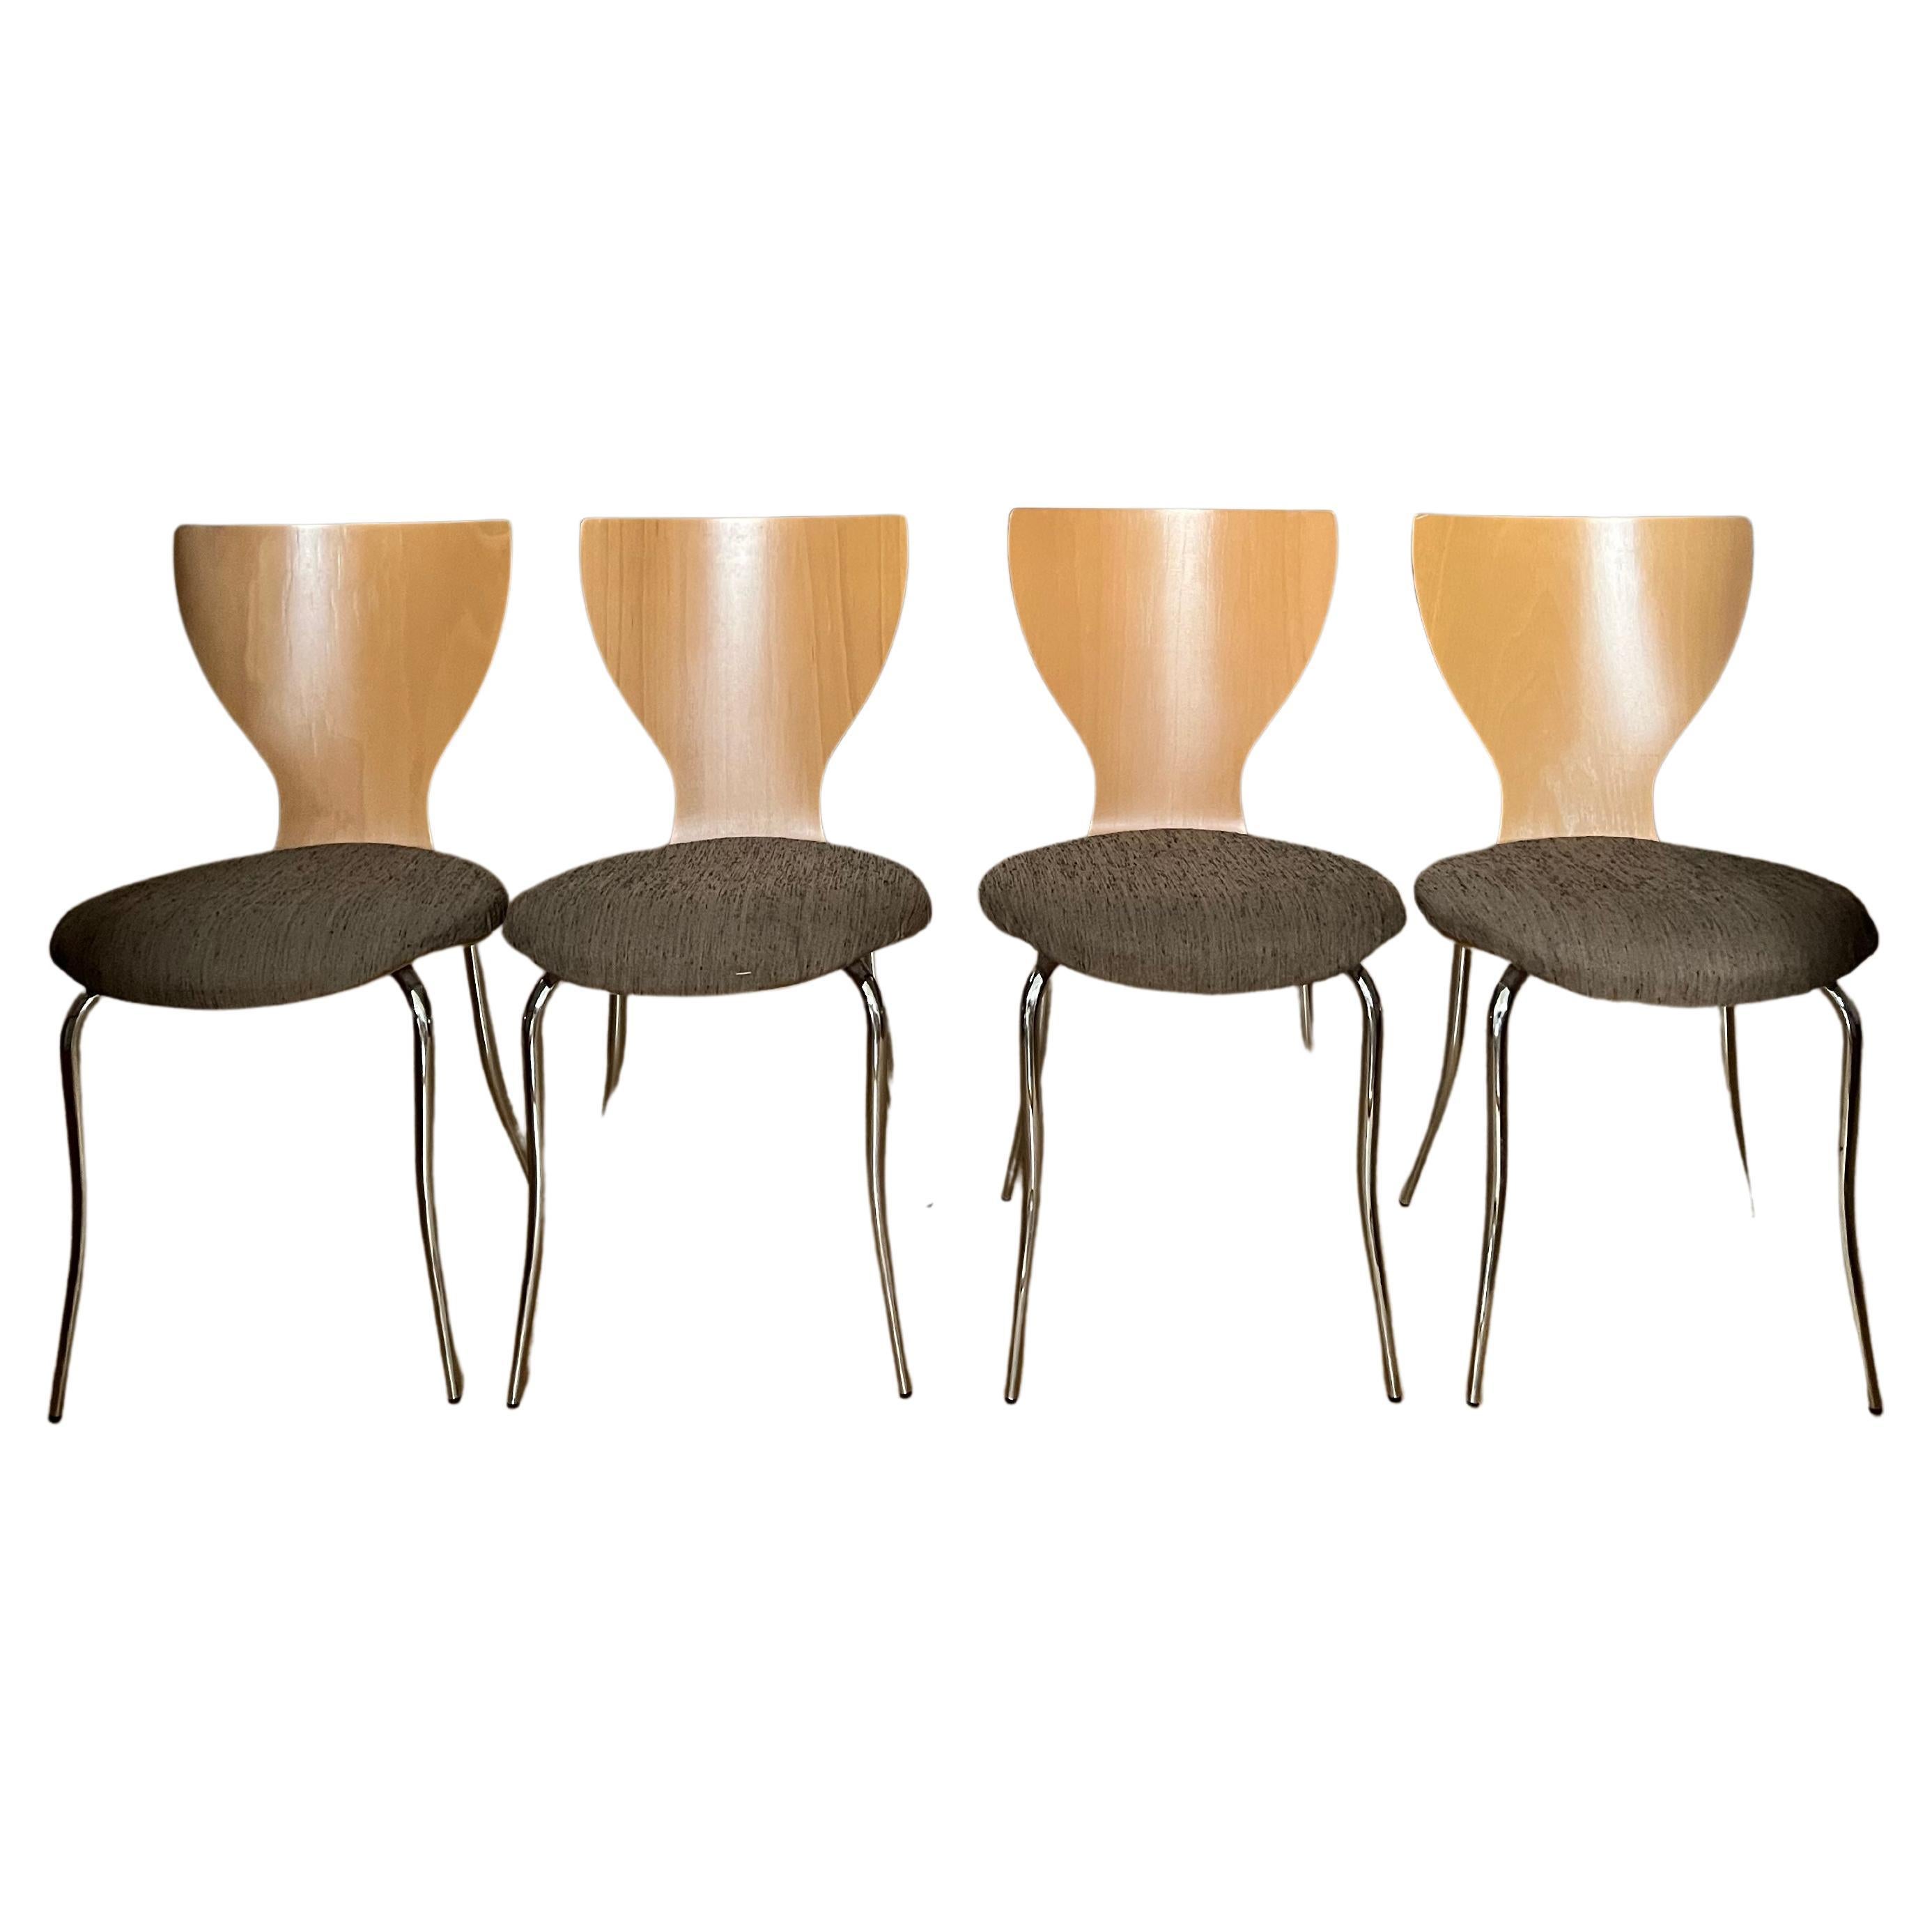 4 Calligaris Mid-Century Modern Italian Bentwood Side Dining Chairs For Sale